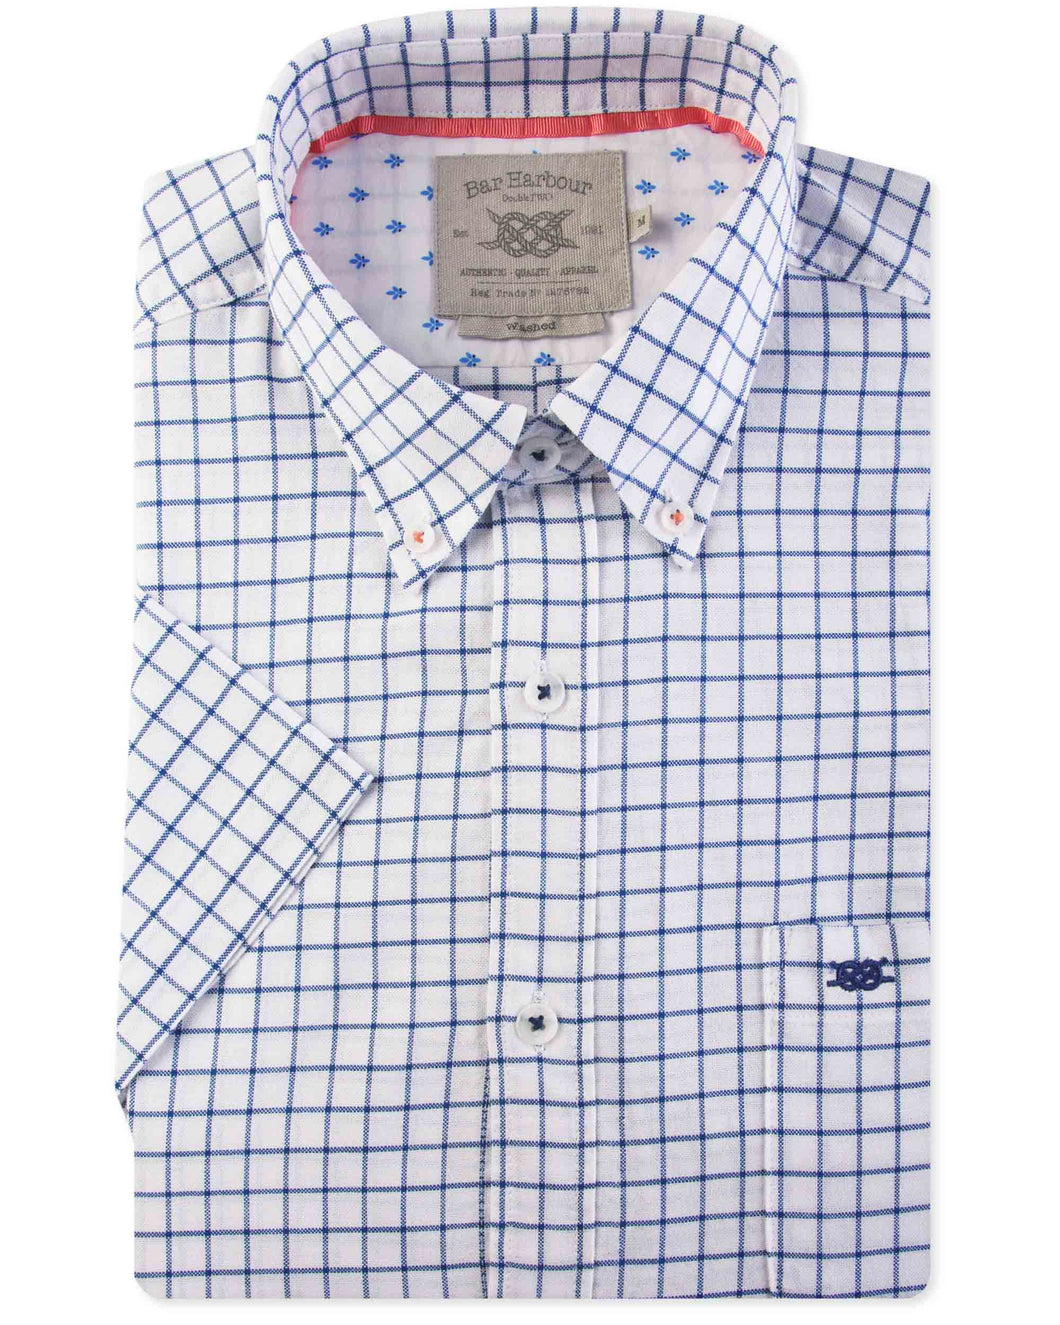 Bar Harbour White and Navy Short Sleeve Check Shirt Big and Tall